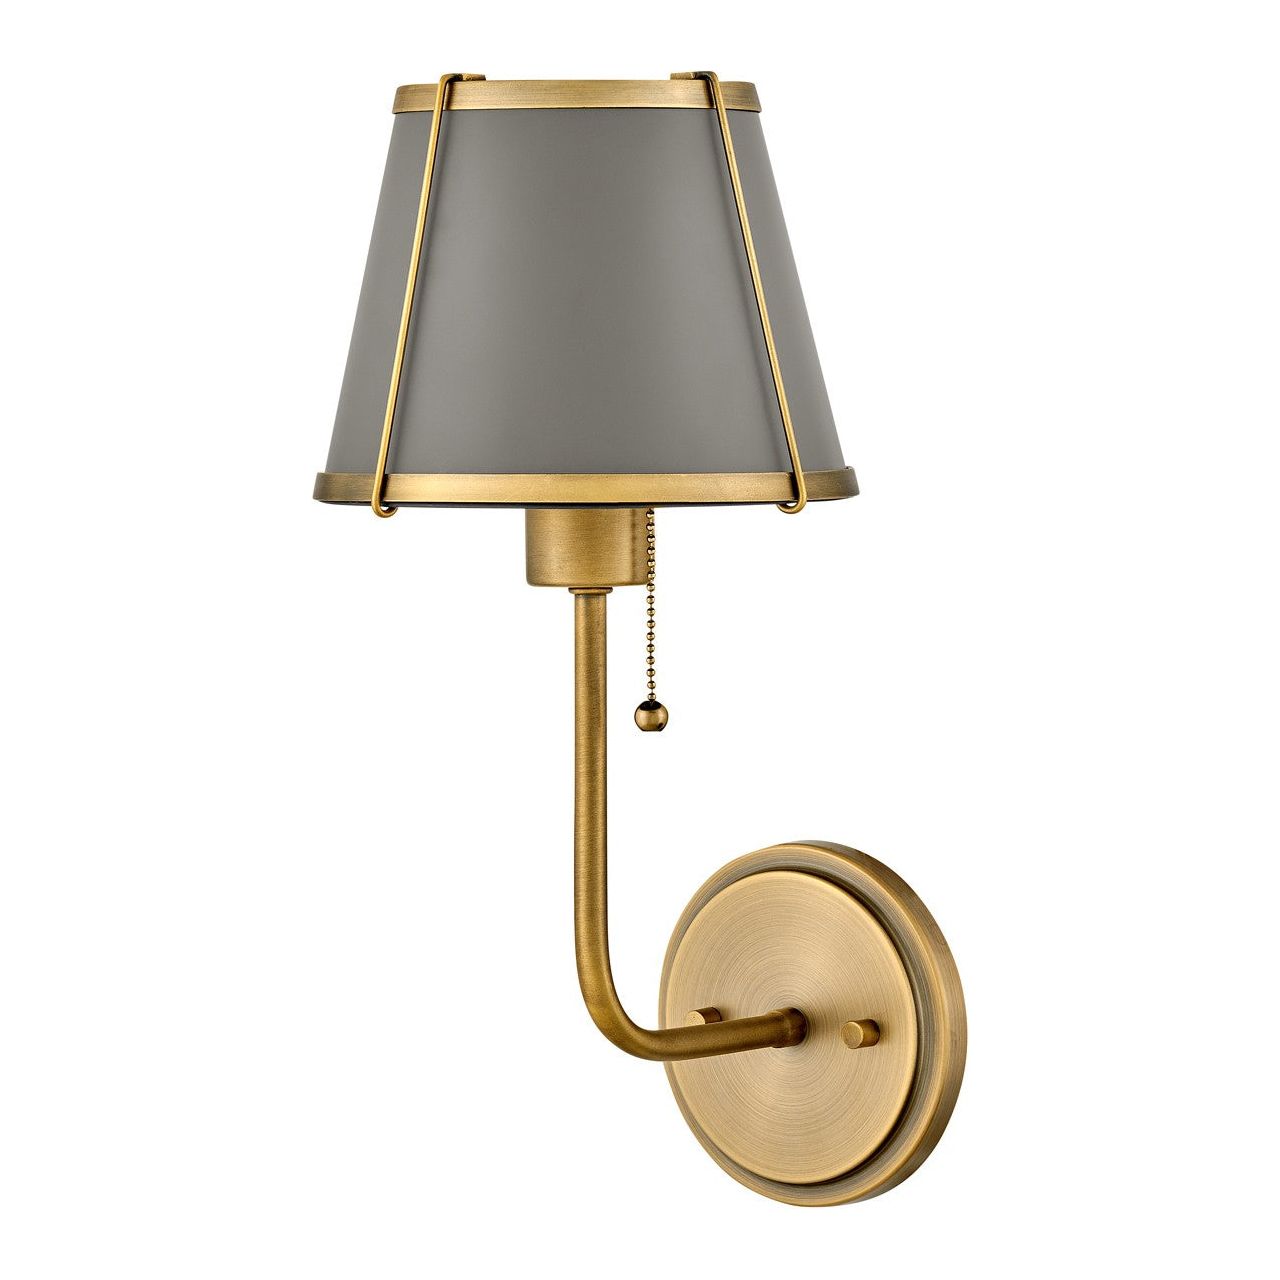 Hinkley Canada - 4890LDB - LED Wall Sconce - Clarke - Lacquered Dark Brass